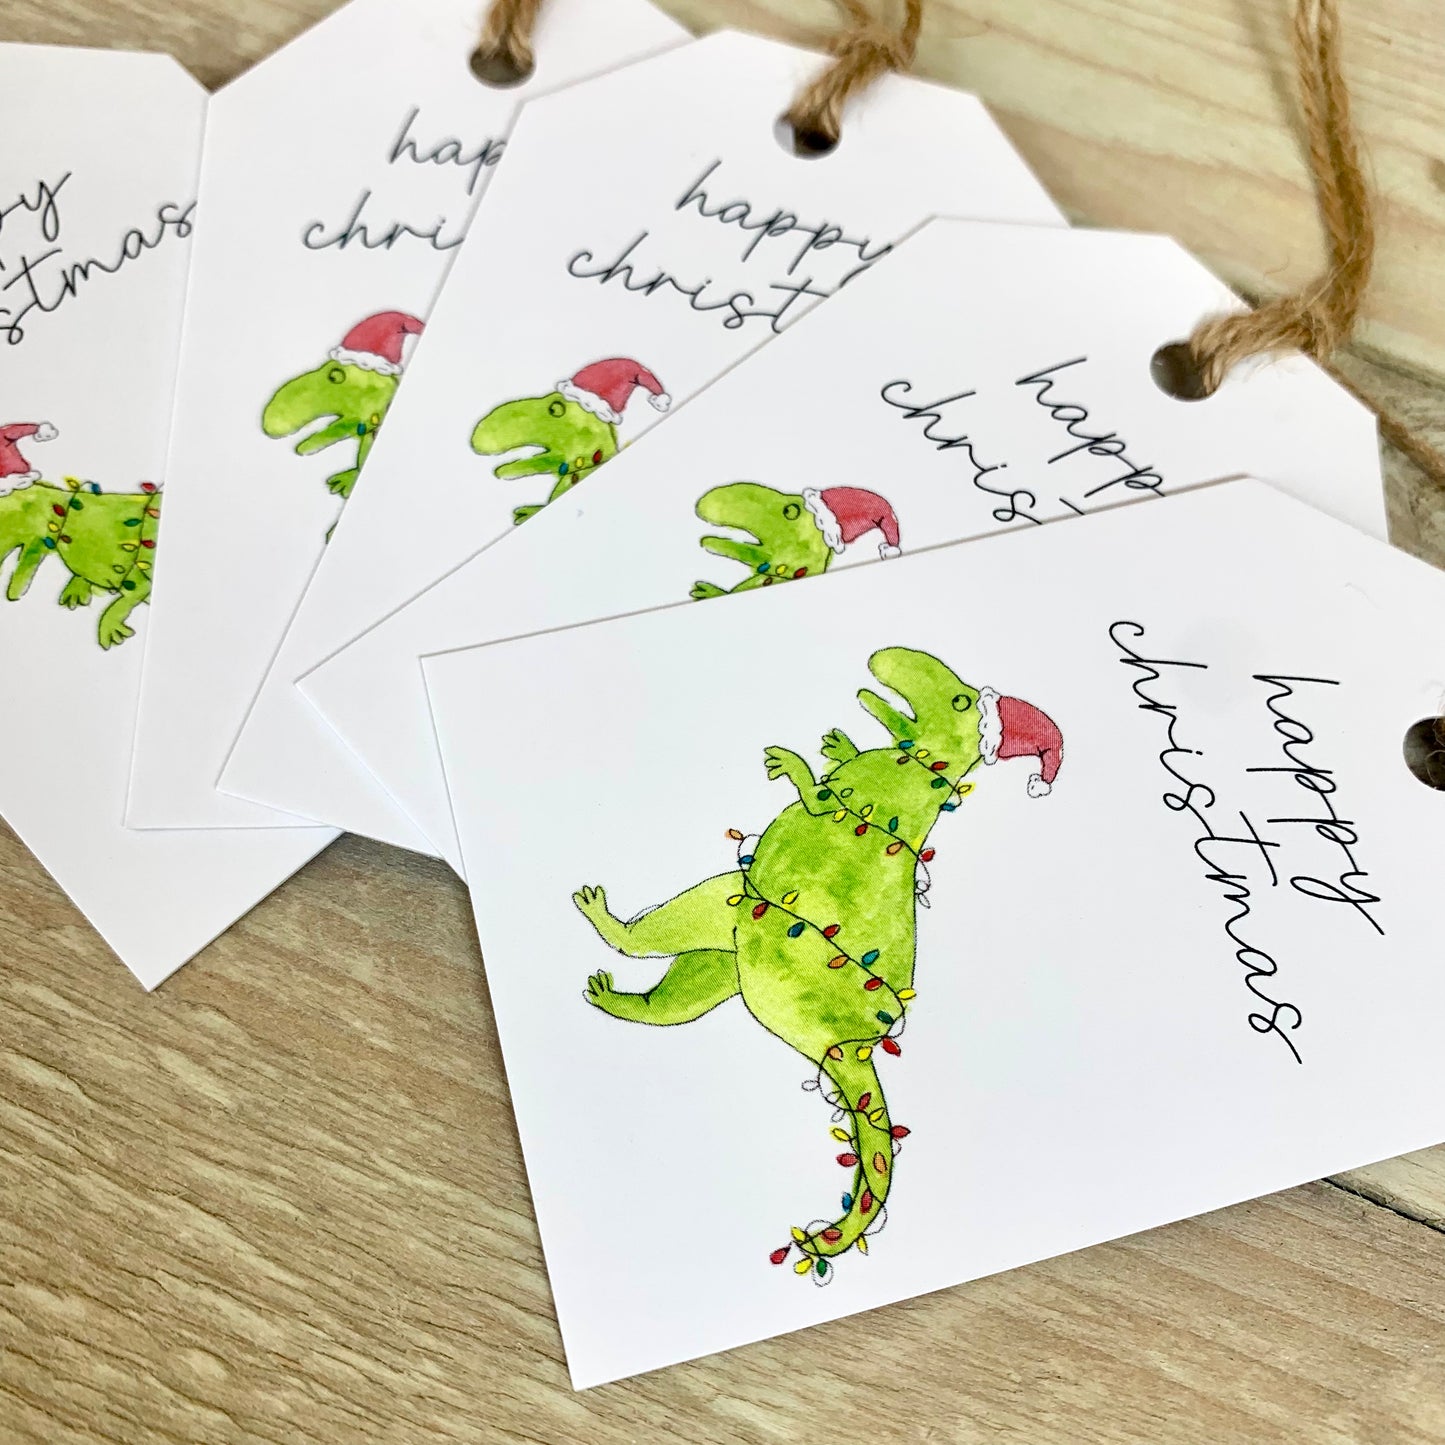 Dino in Lights Christmas Gift Tags